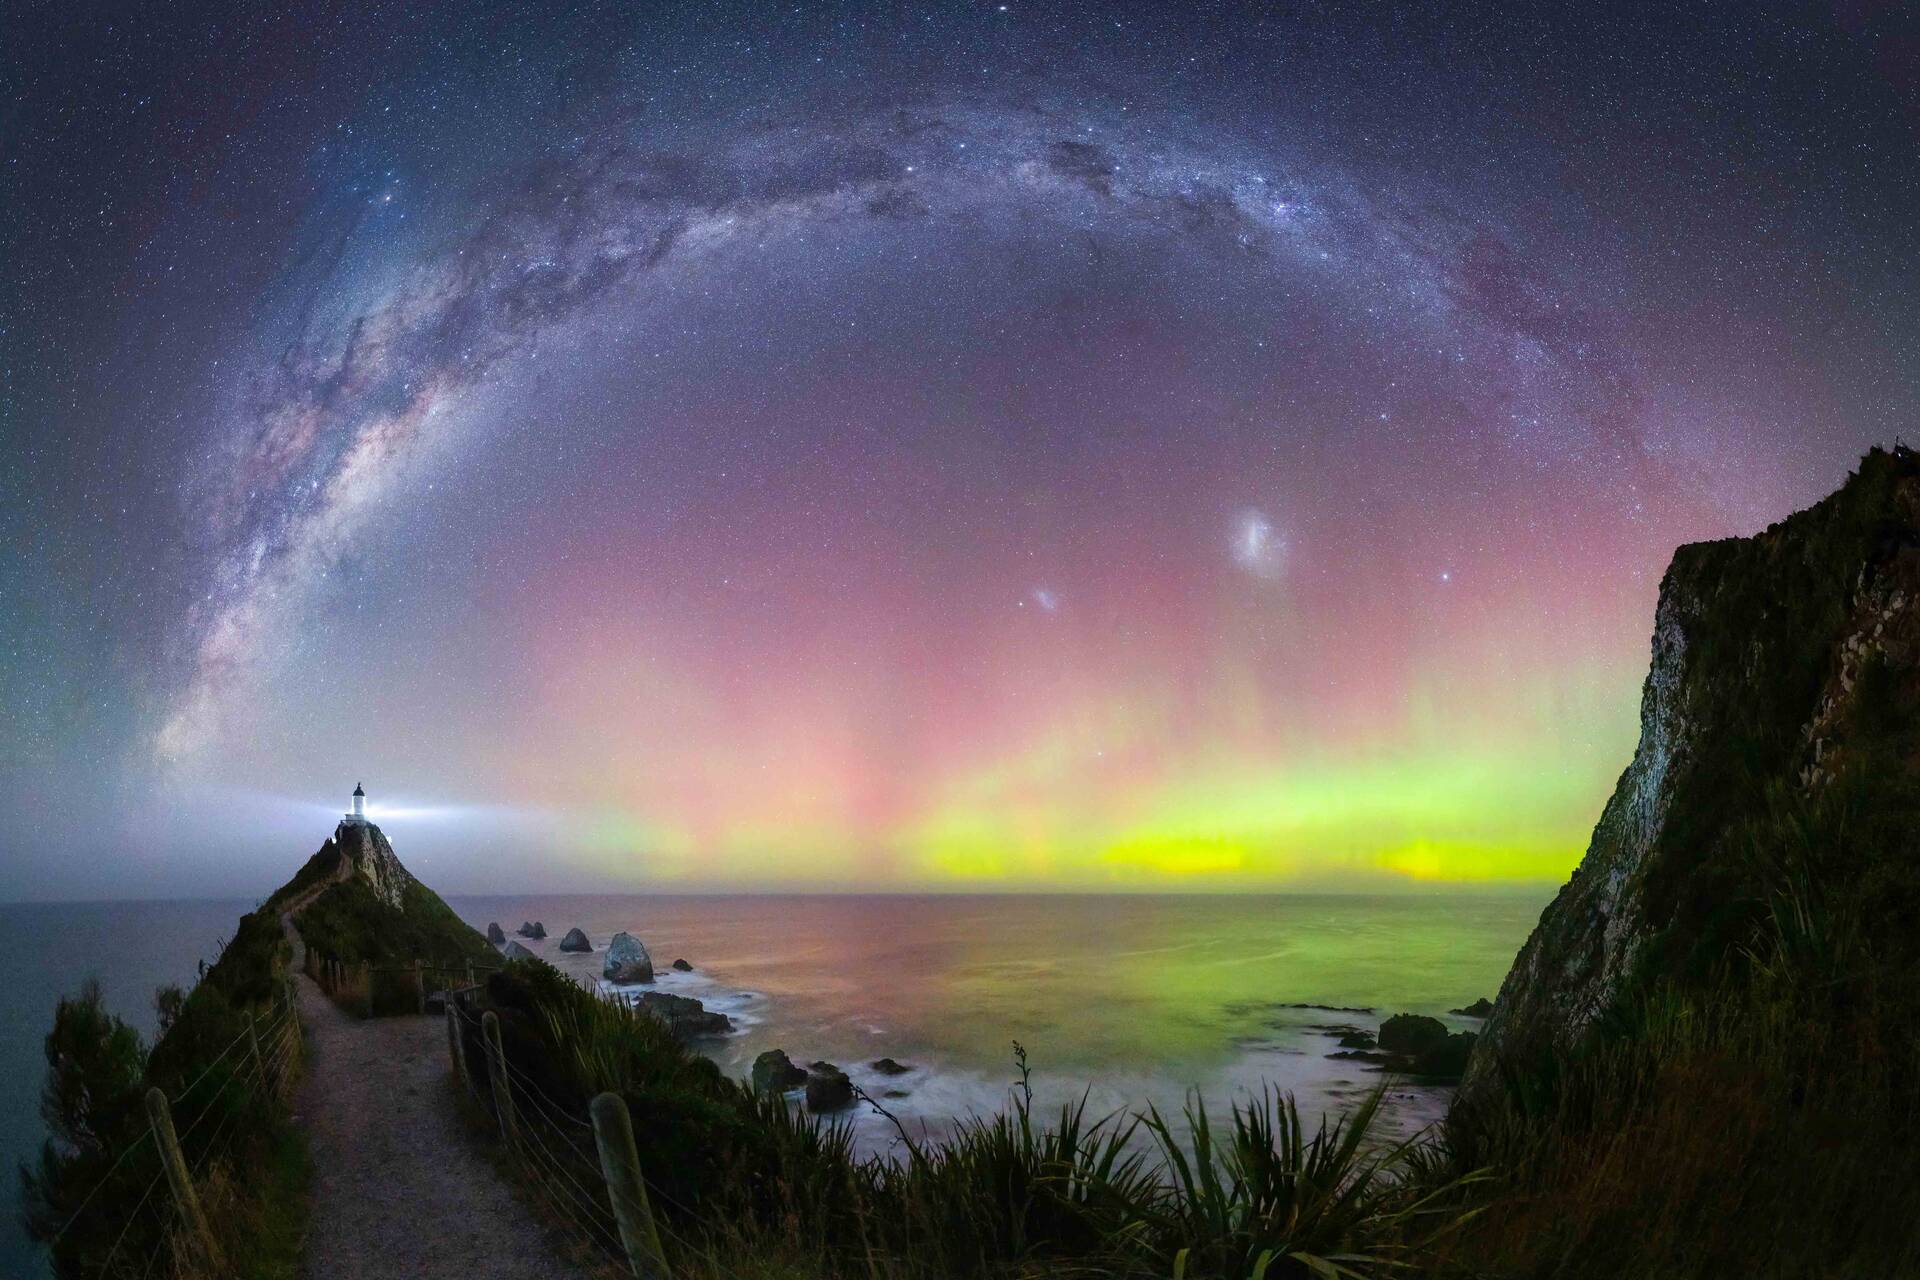 Full Milky Way arc covering the sky and shining over a bright Aurora Australis